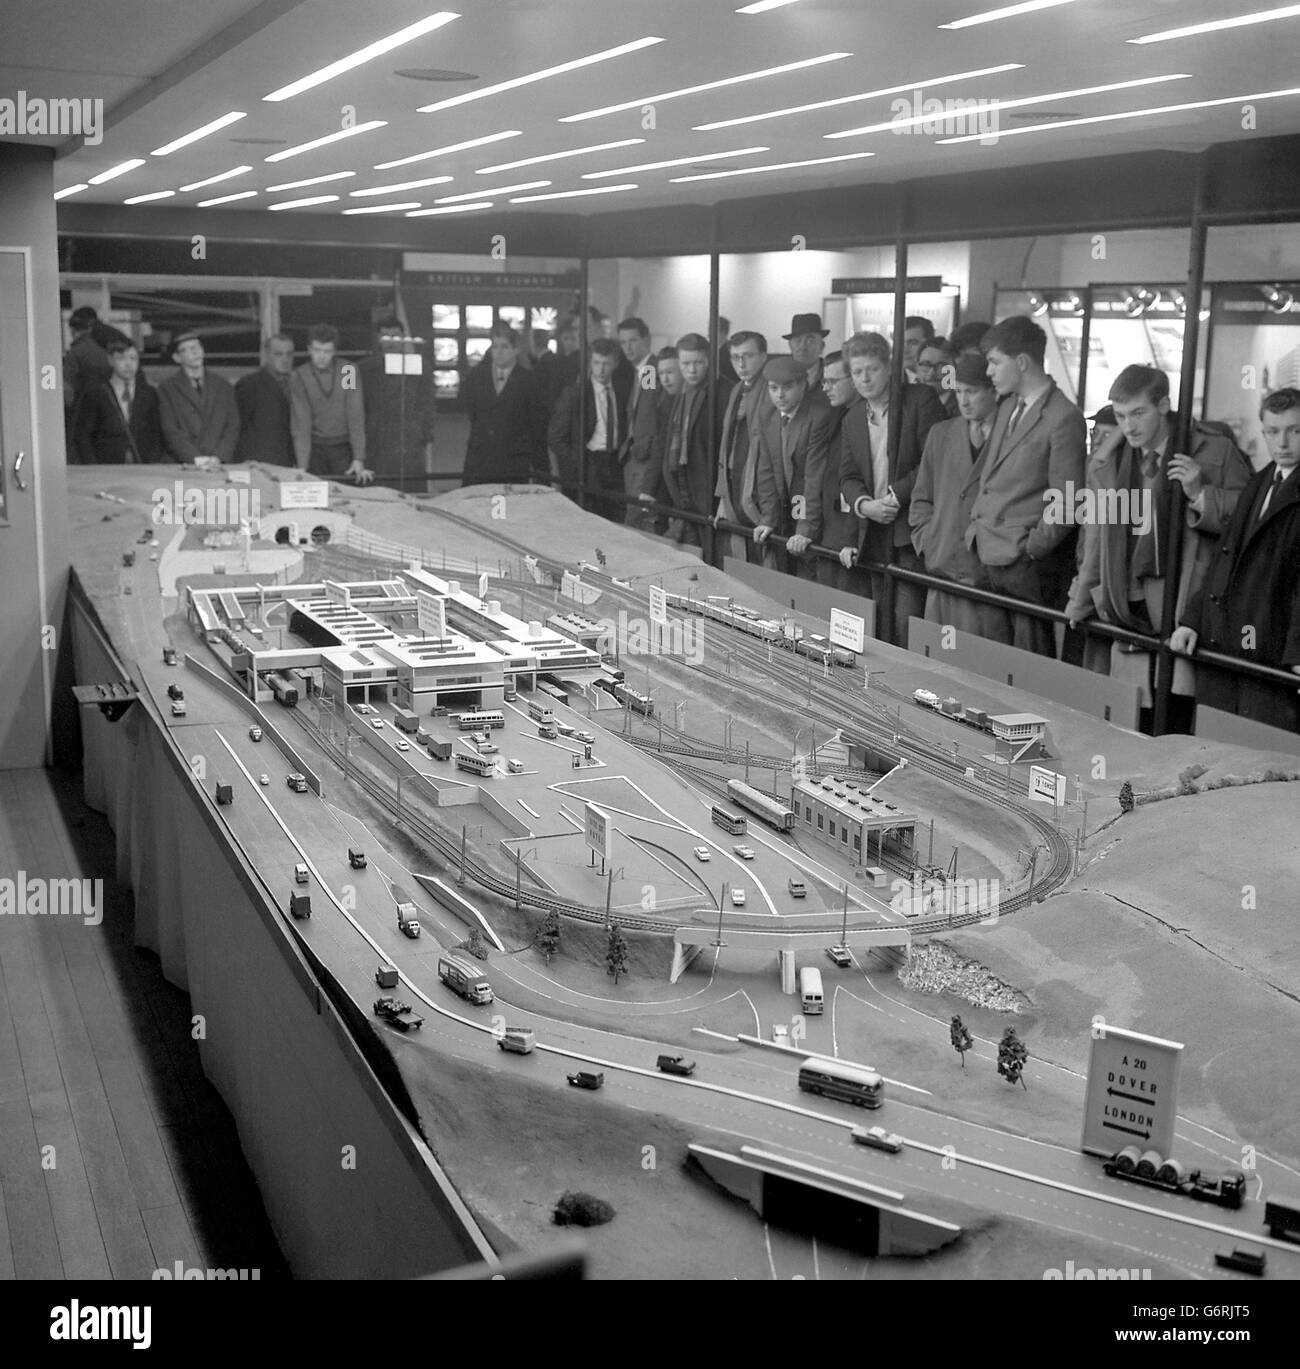 Drawing crowds at the British Railways (London Midland Region) railway exhibition taking place in Manchester is this 30ft long working model of the railway terminal at the British end of the proposed Channel Tunnel. The model includes the main terminal buildings containing a passenger station, car and lorry-loading platforms and a working railway layout with an Anglo-Continental freight marshalling yard. Stock Photo